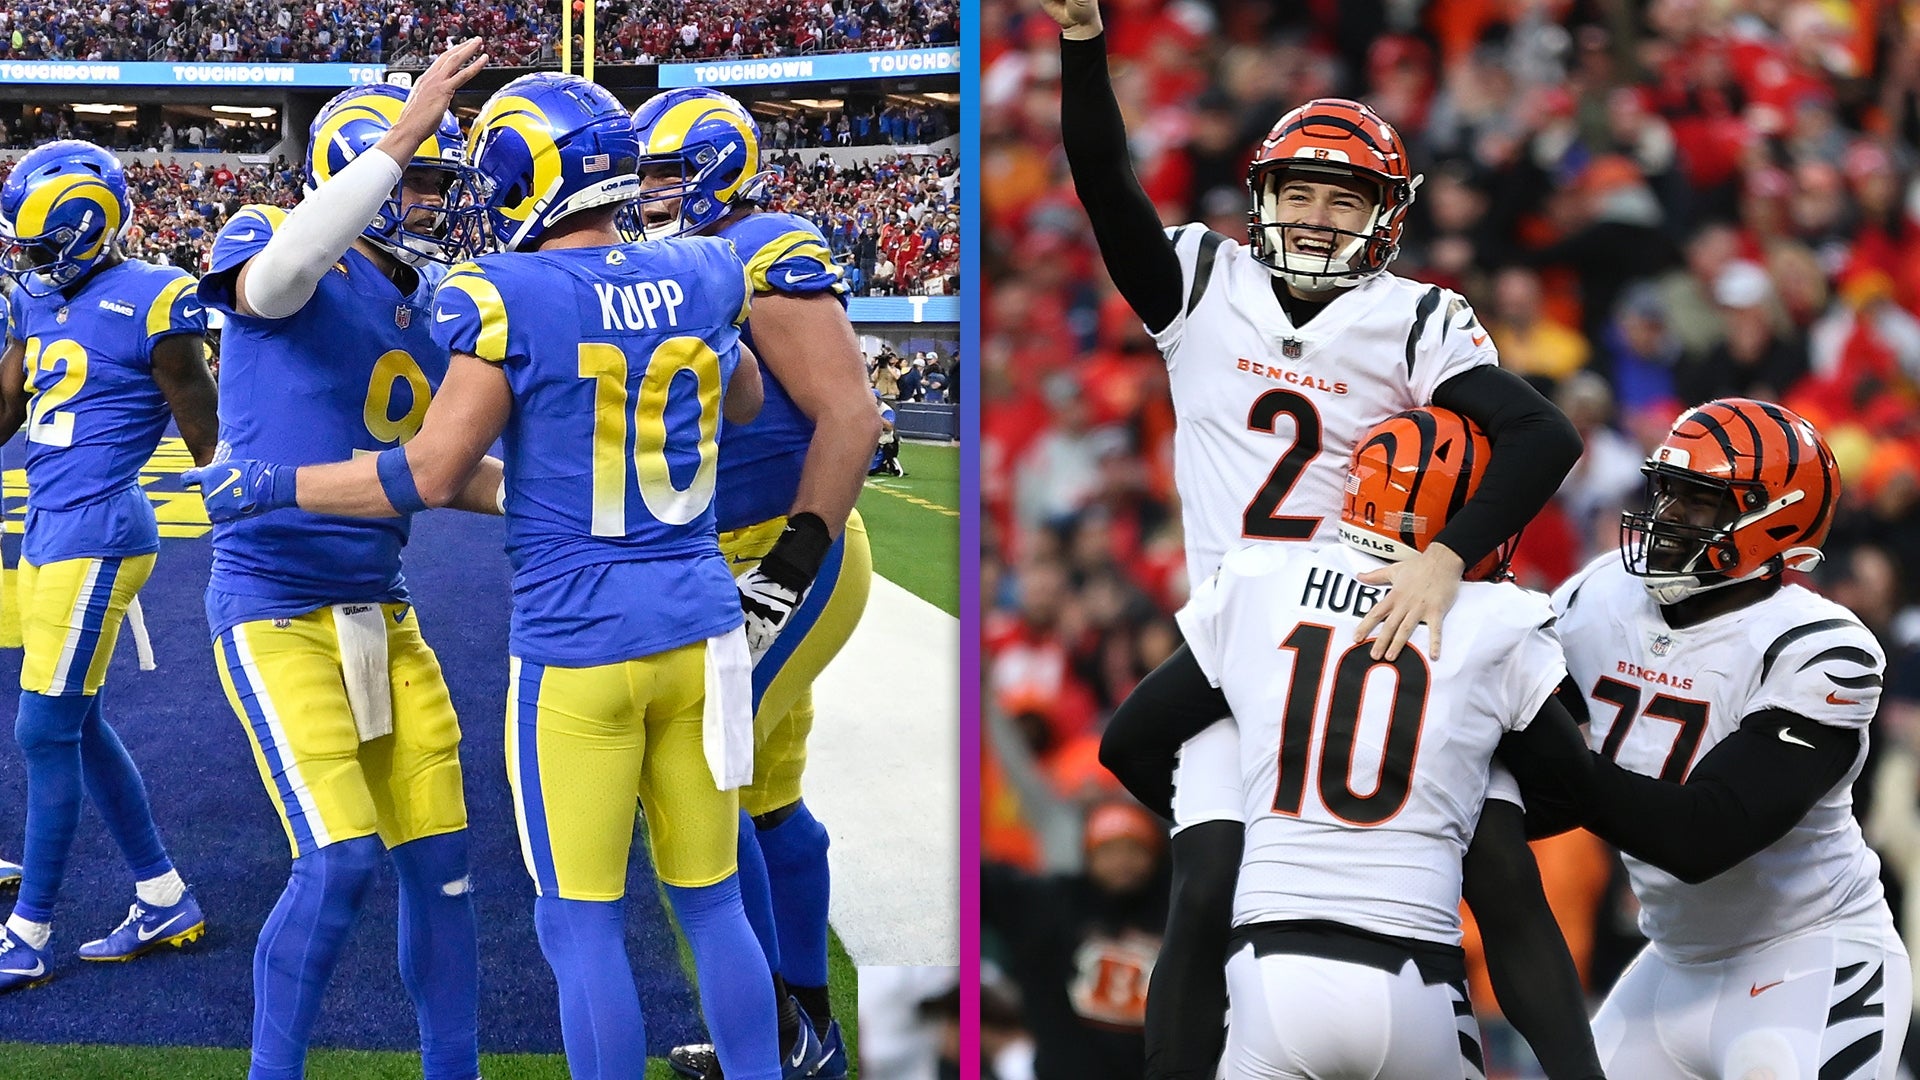 Introducing the Rams and Bengals who will star in Super Bowl LVI